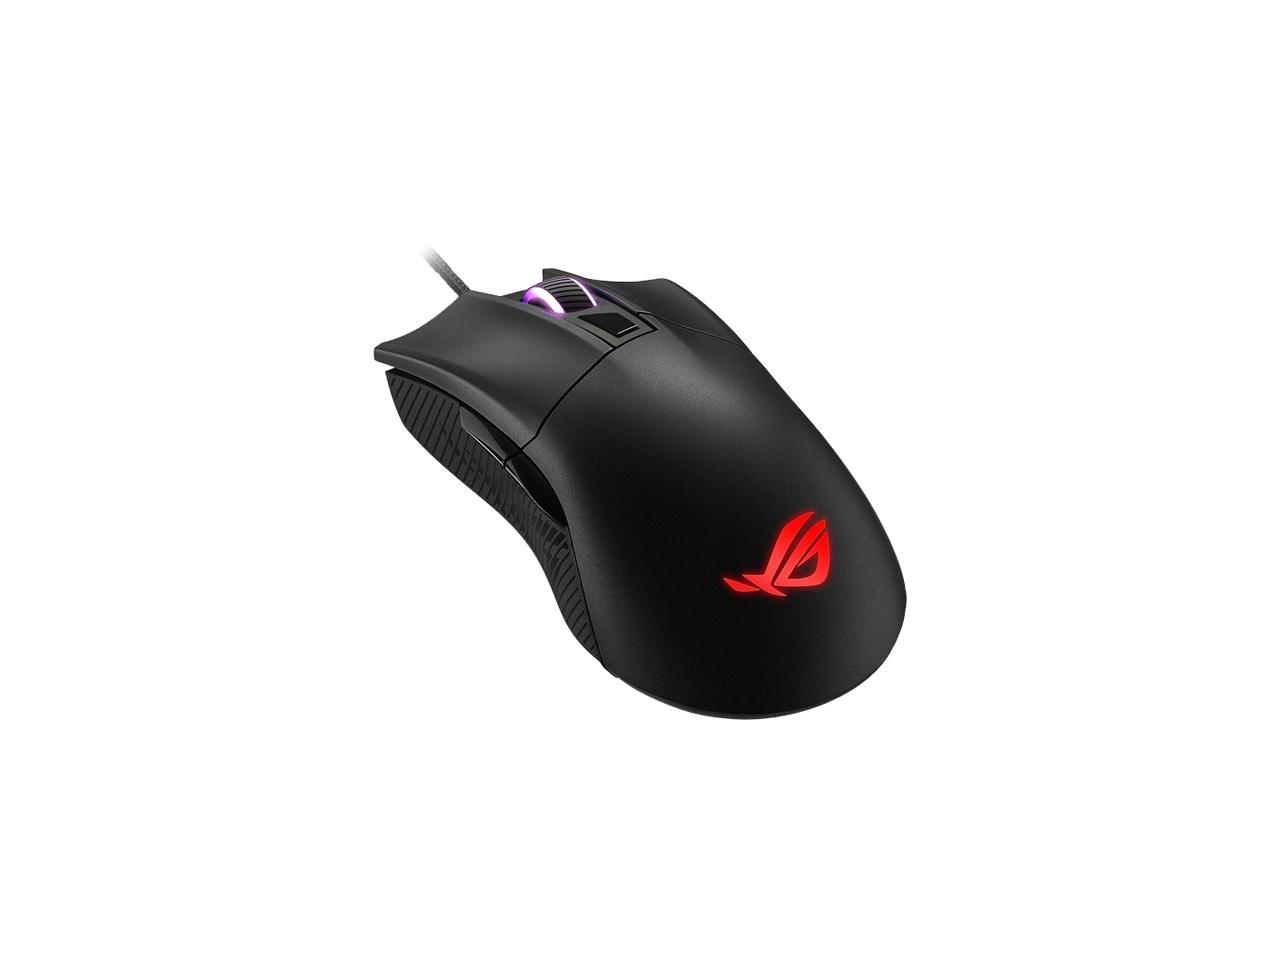 ASUS Optical Gaming Mouse - ROG Gladius II Core | Ergonomic Right-hand Grip | Lightweight PC Gaming Mouse | 6200 DPI Optical Sensor | Omron Switches | 6 Buttons | Aura Sync RGB Lighting - image 1 of 4